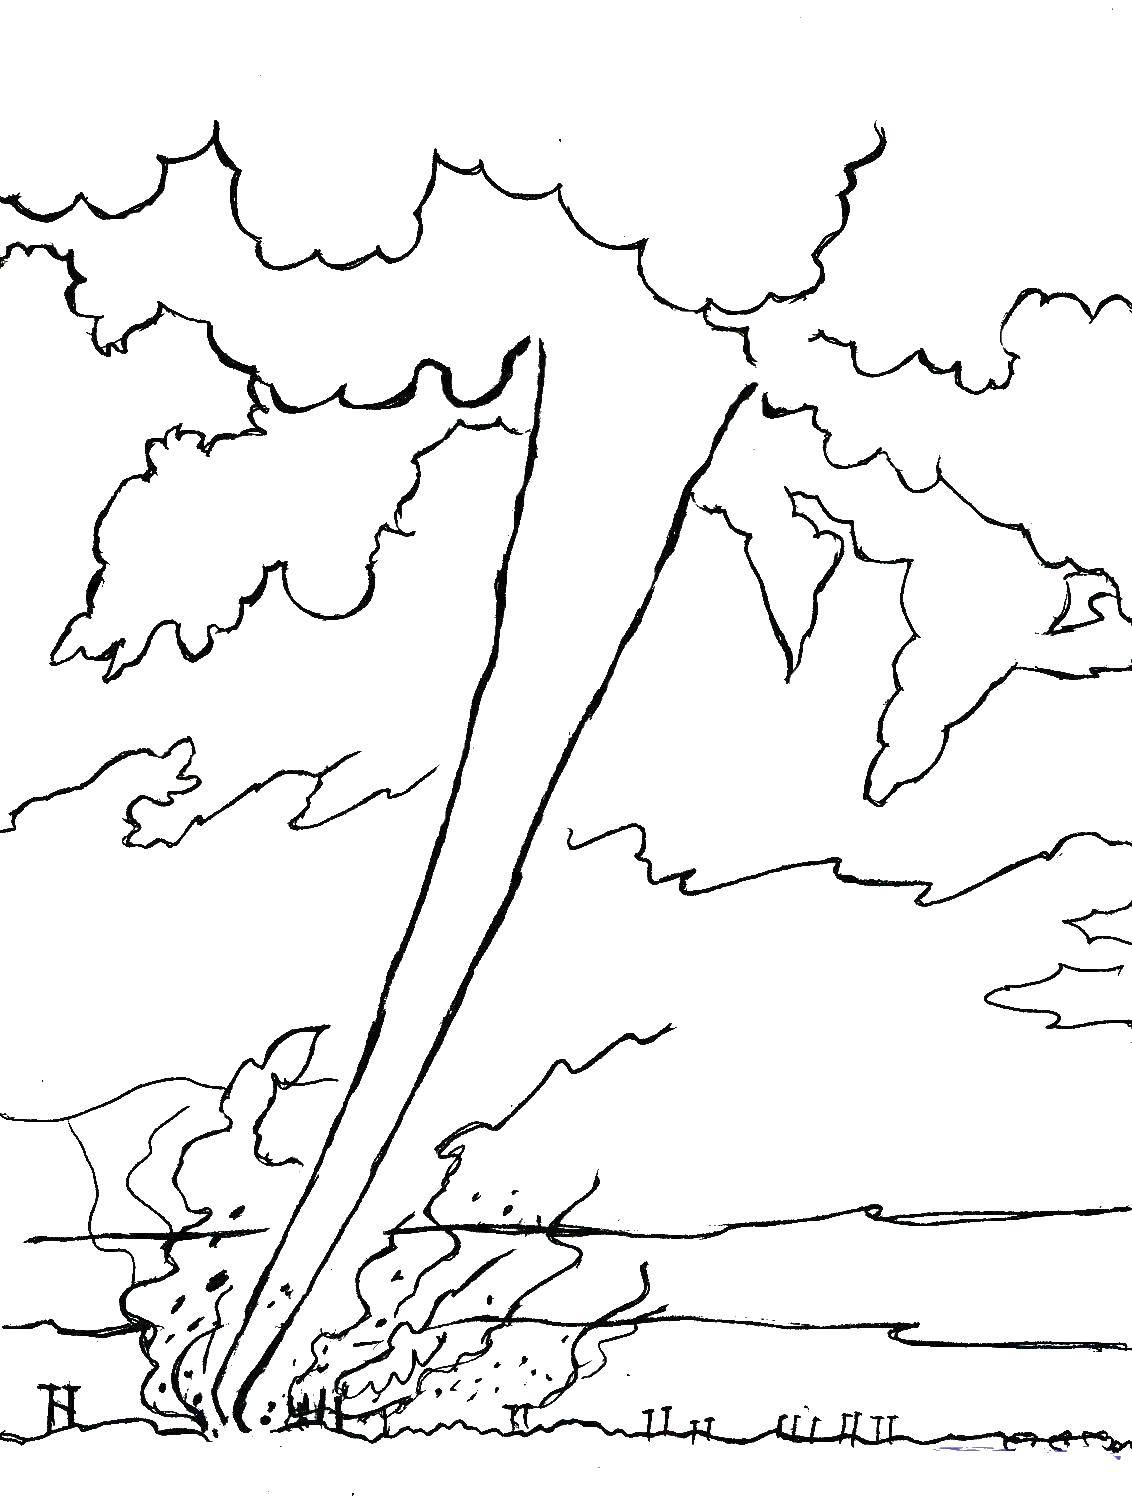 Coloring A large tornado. Category coloring. Tags:  Tornadoes.